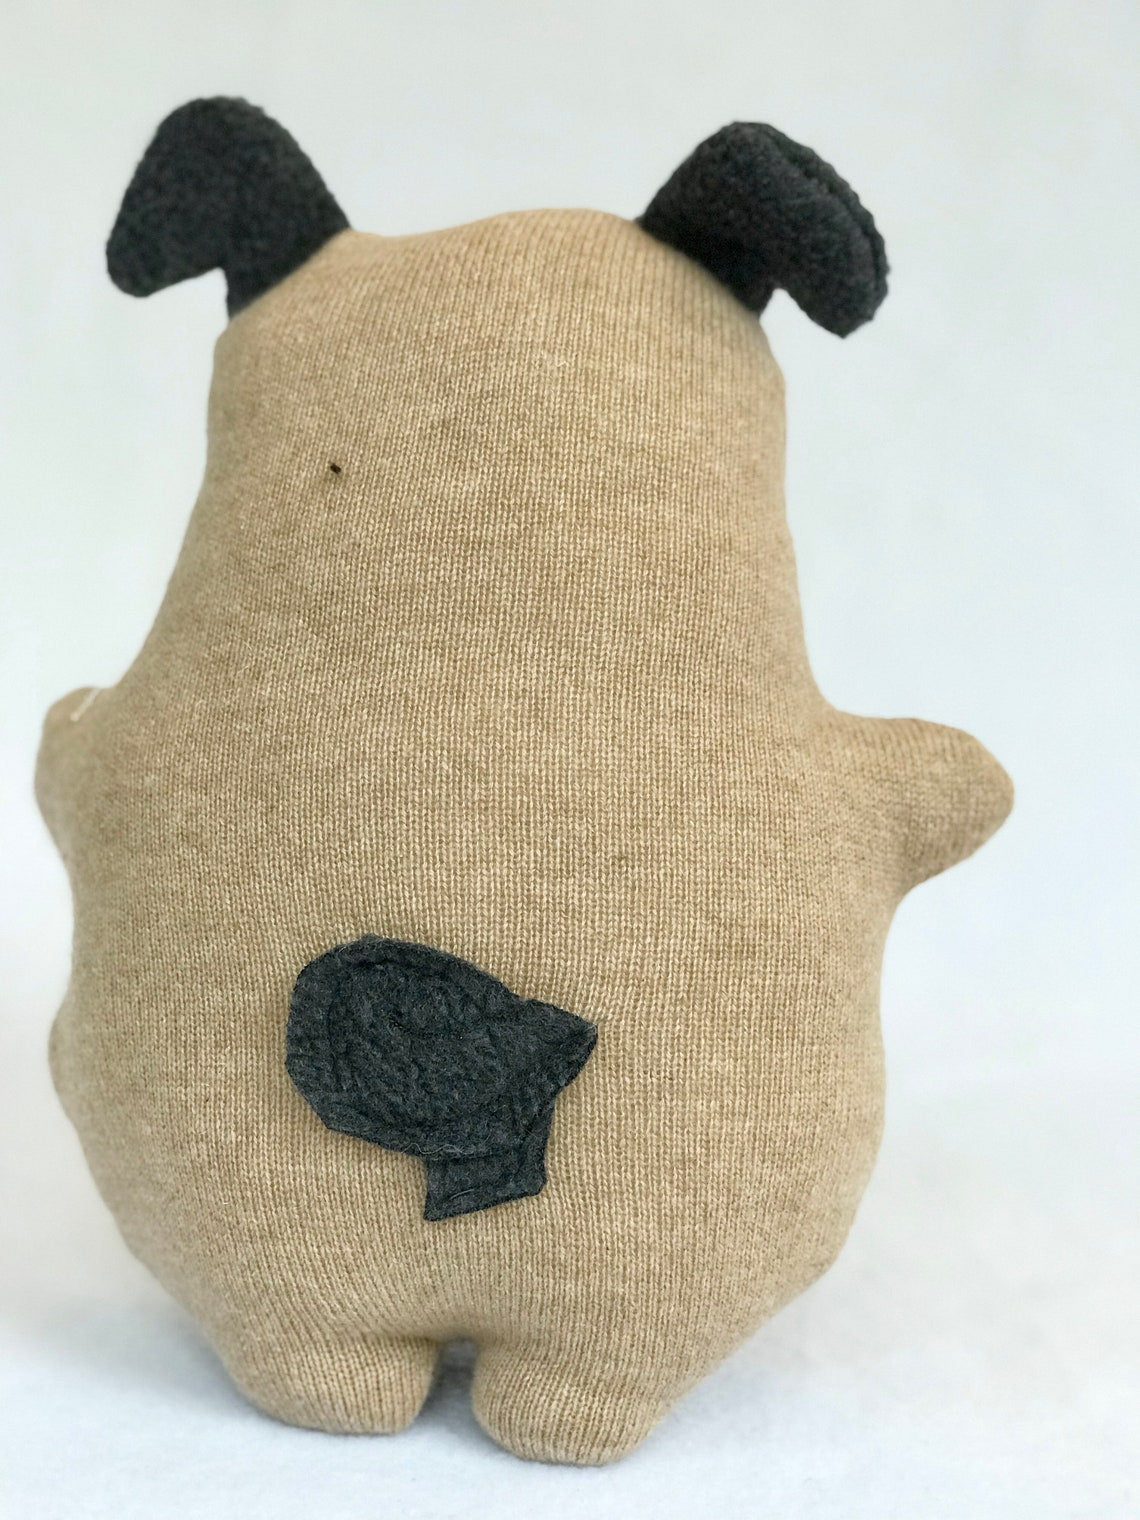 The back of Pug stuffed animal, handmade from up cycled fabrics. Showing curly tail